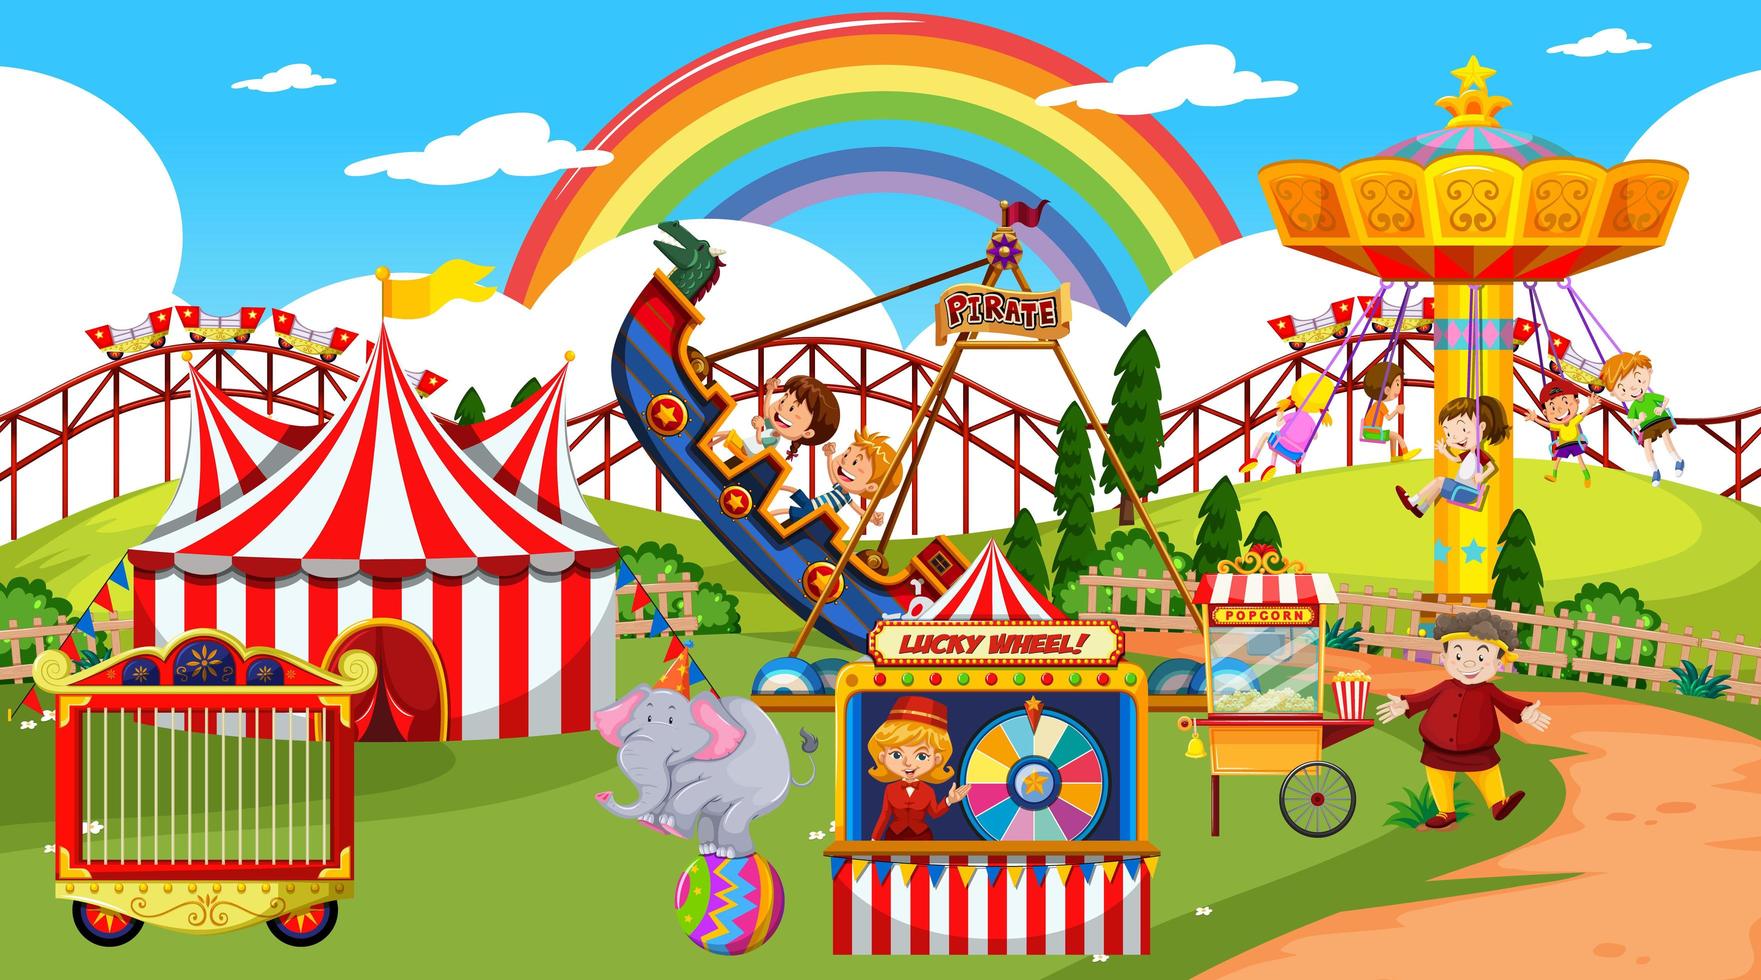 Amusement park scene at daytime with rainbow in the sky vector